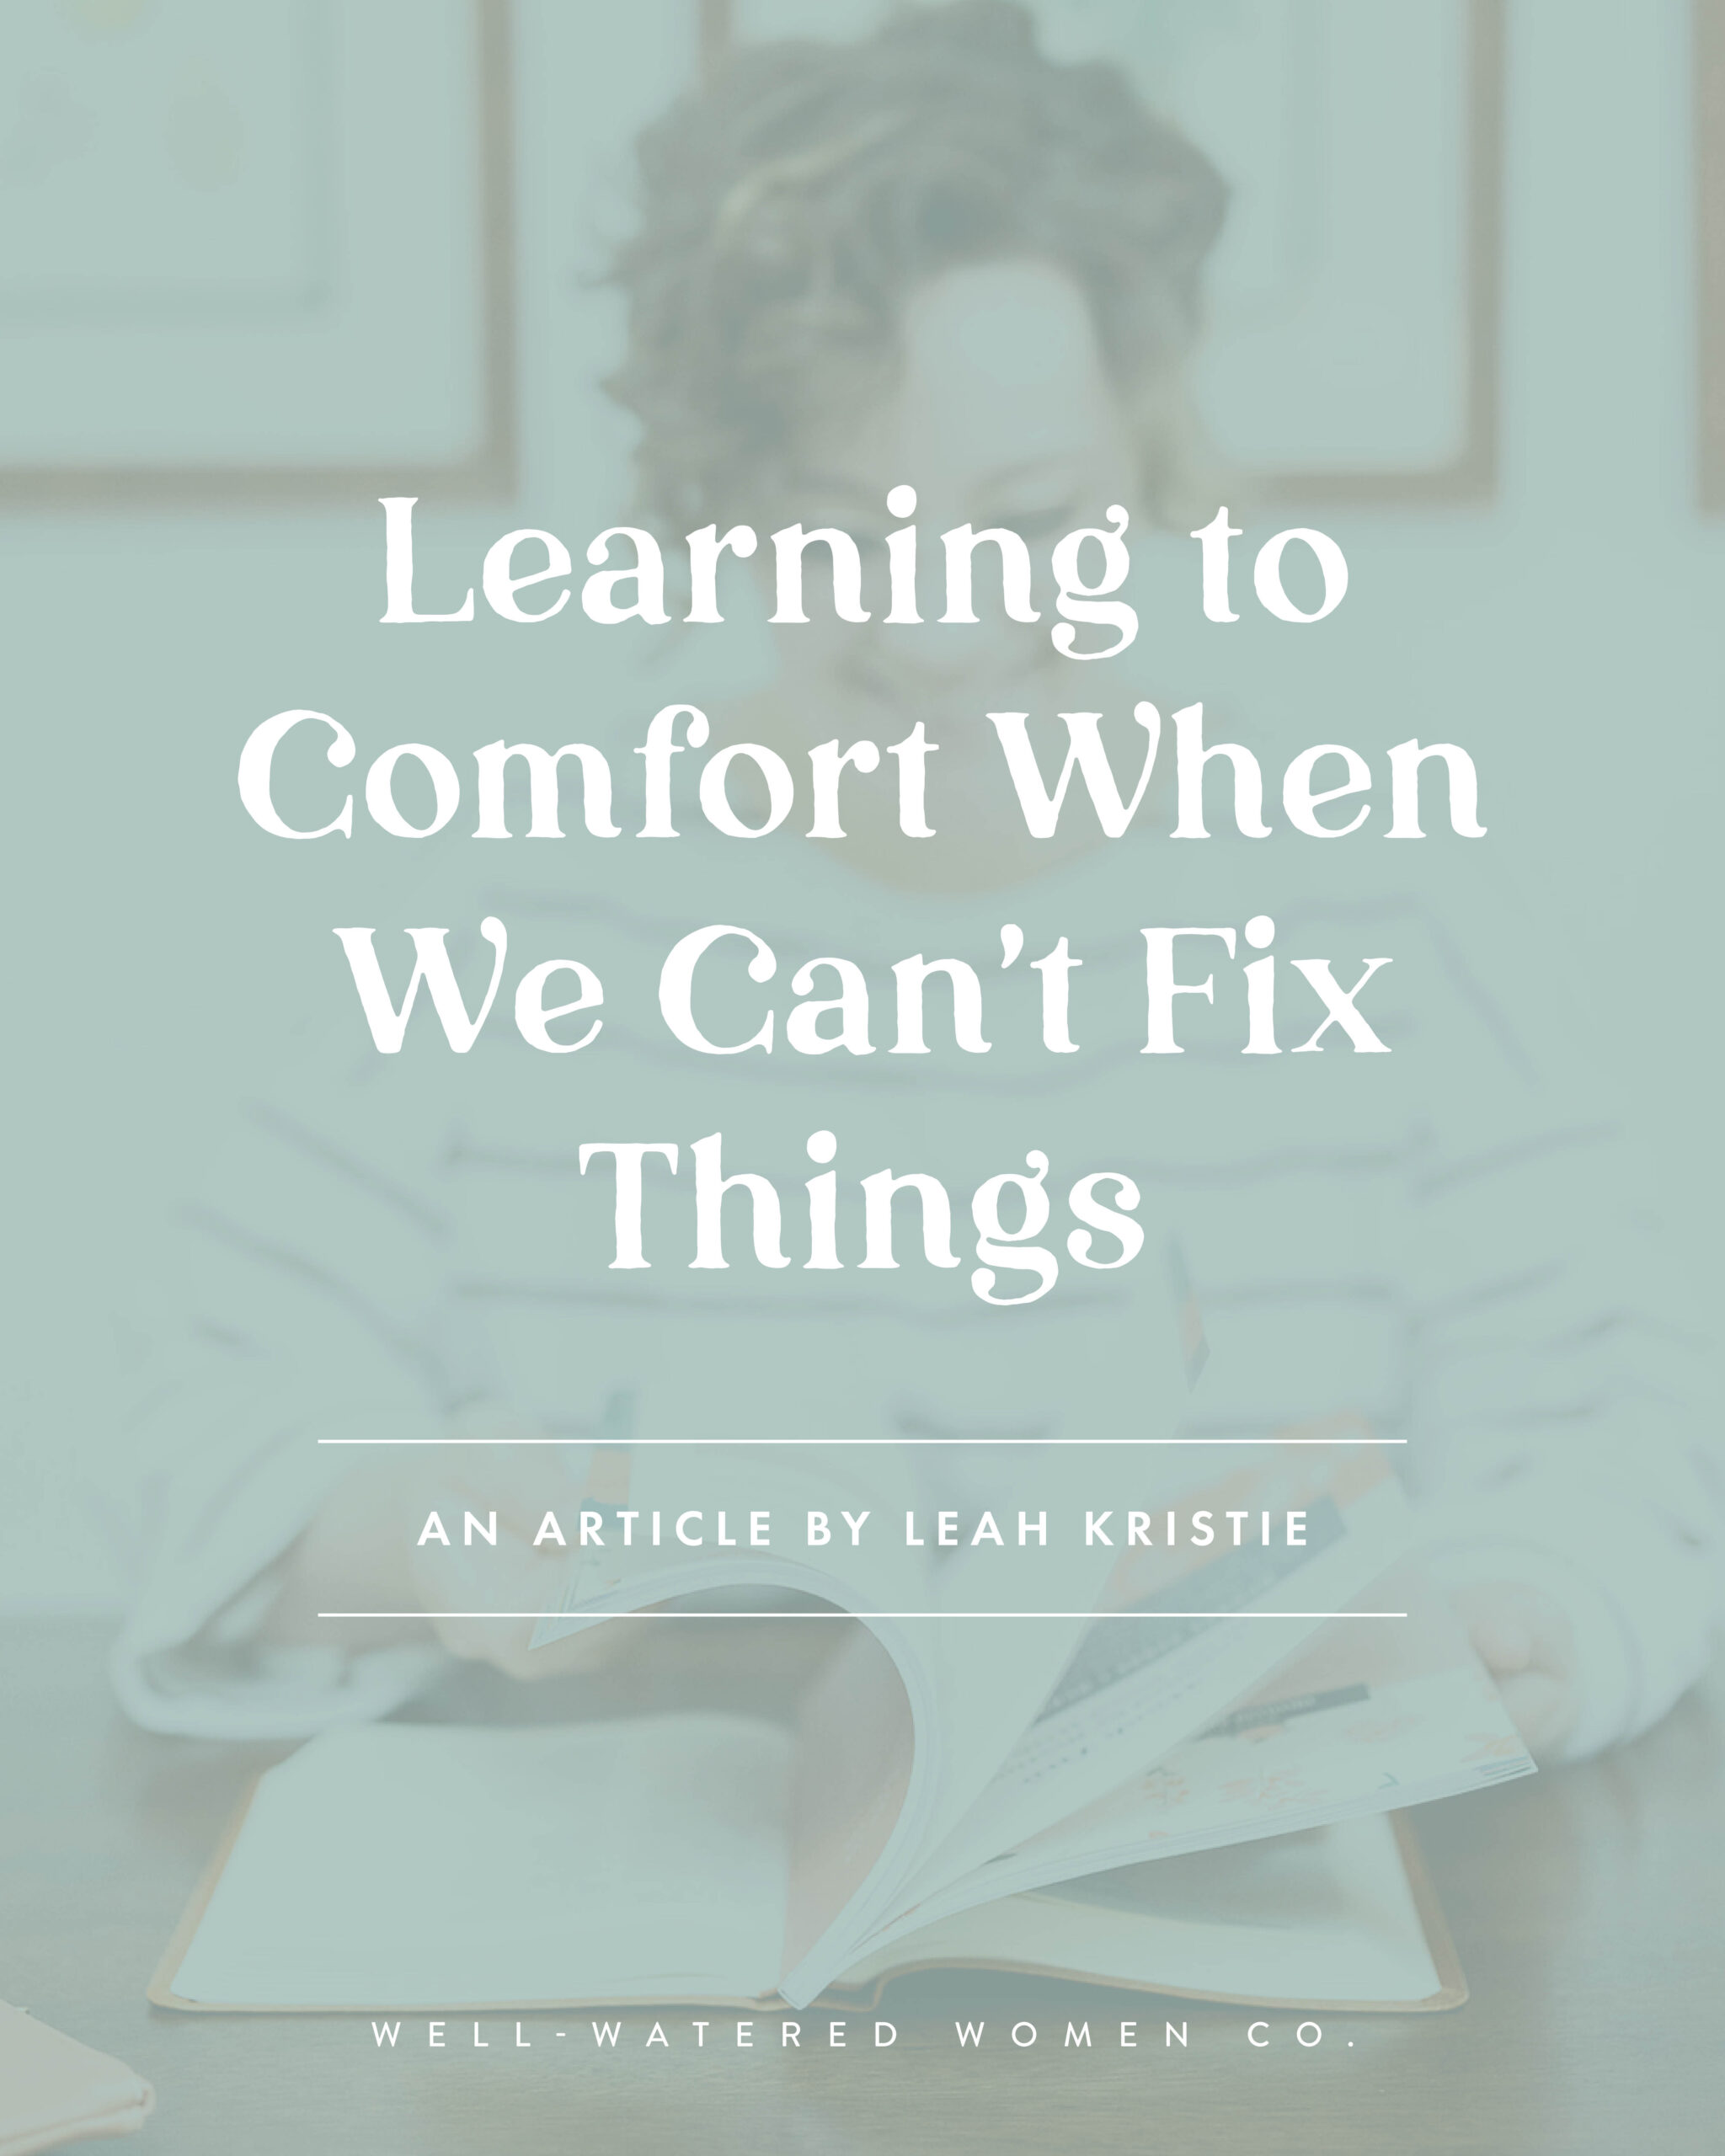 Learning to Comfort When We Can't Fix Things - an article from Well-Watered Women